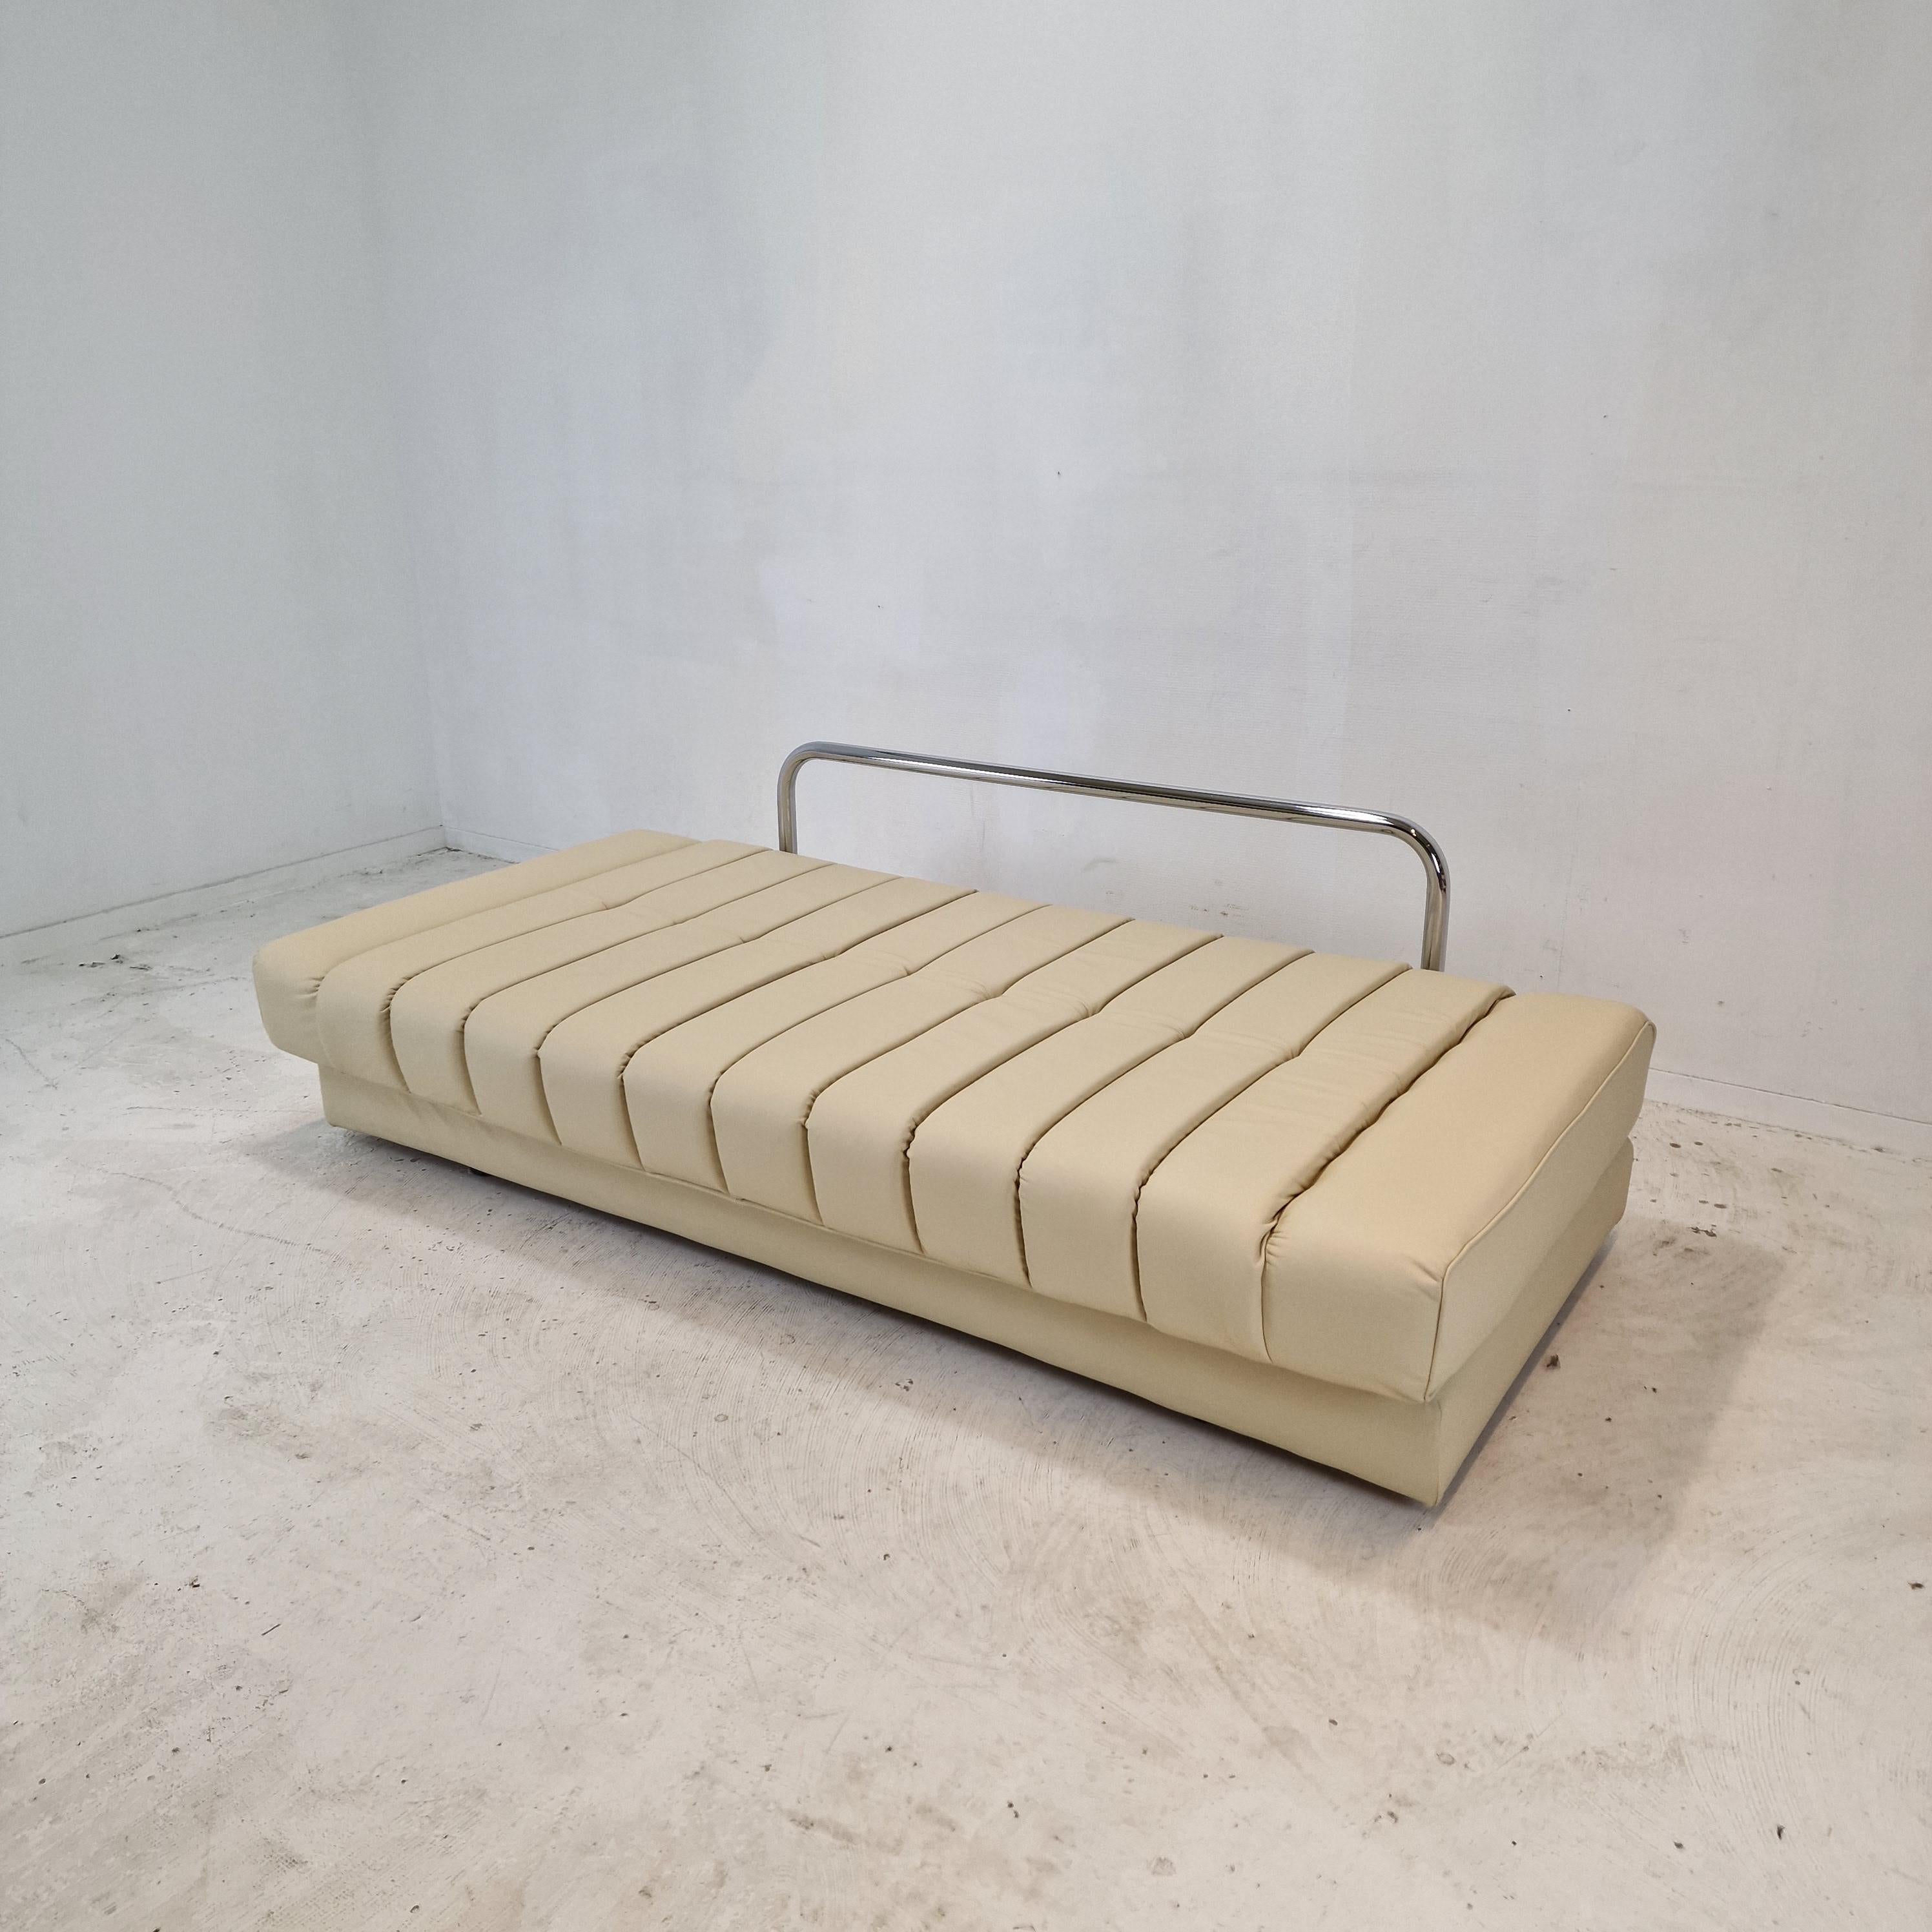 DS-85 Sofa or Daybed by De Sede, Switzerland 1970s For Sale 11